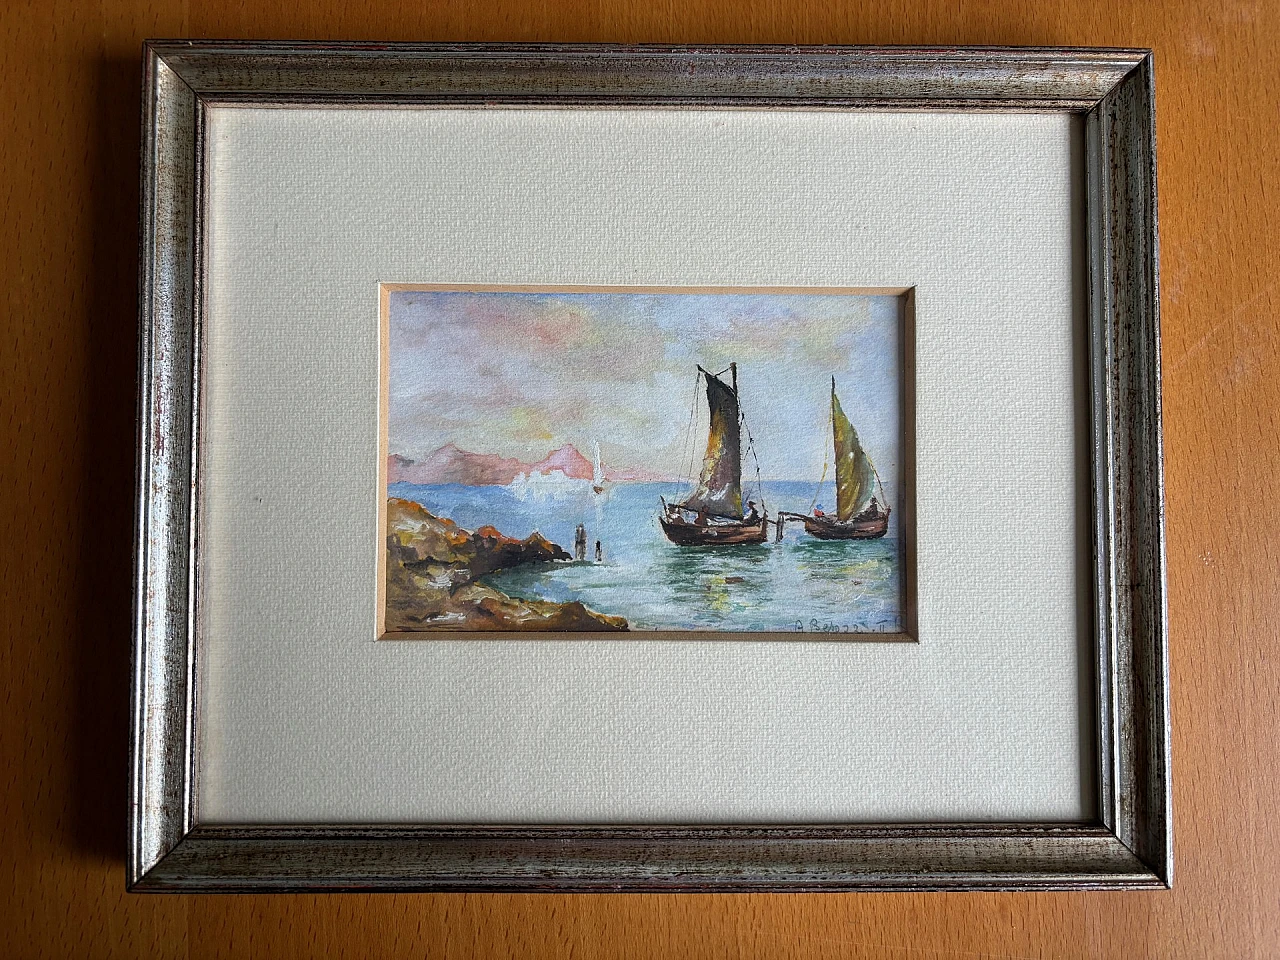 A. Besozzi, seascape with boats, painting, 1930s 1